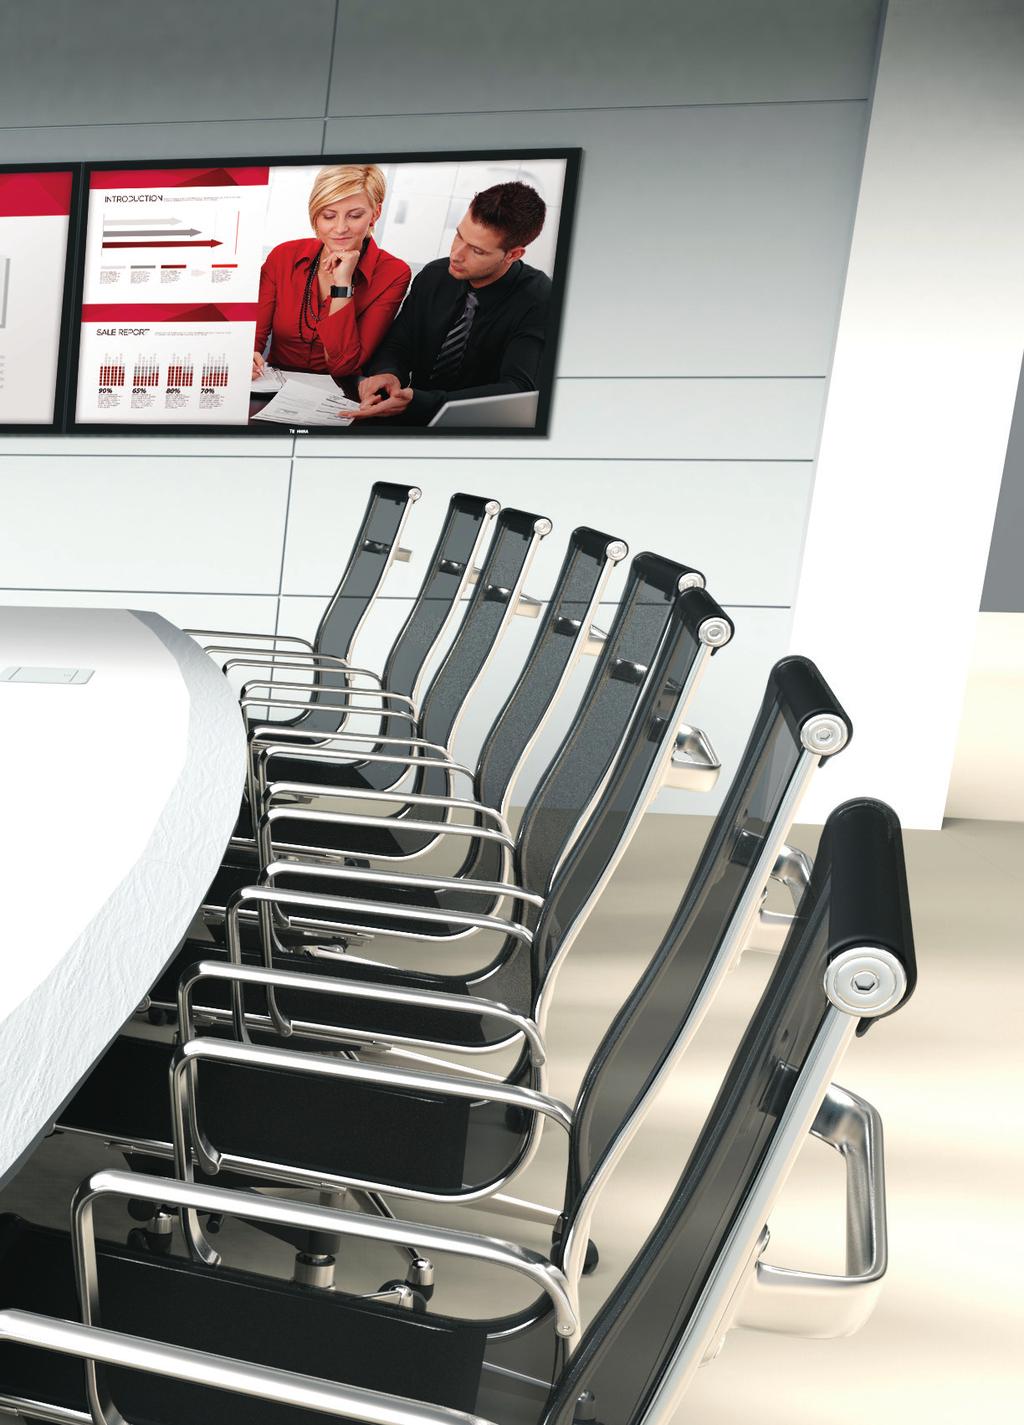 Room Style Large, formal meeting environment with multiple displays 8 to 25 people (and even more) Multiple presenters Cutting-edge AV systems Sleek,